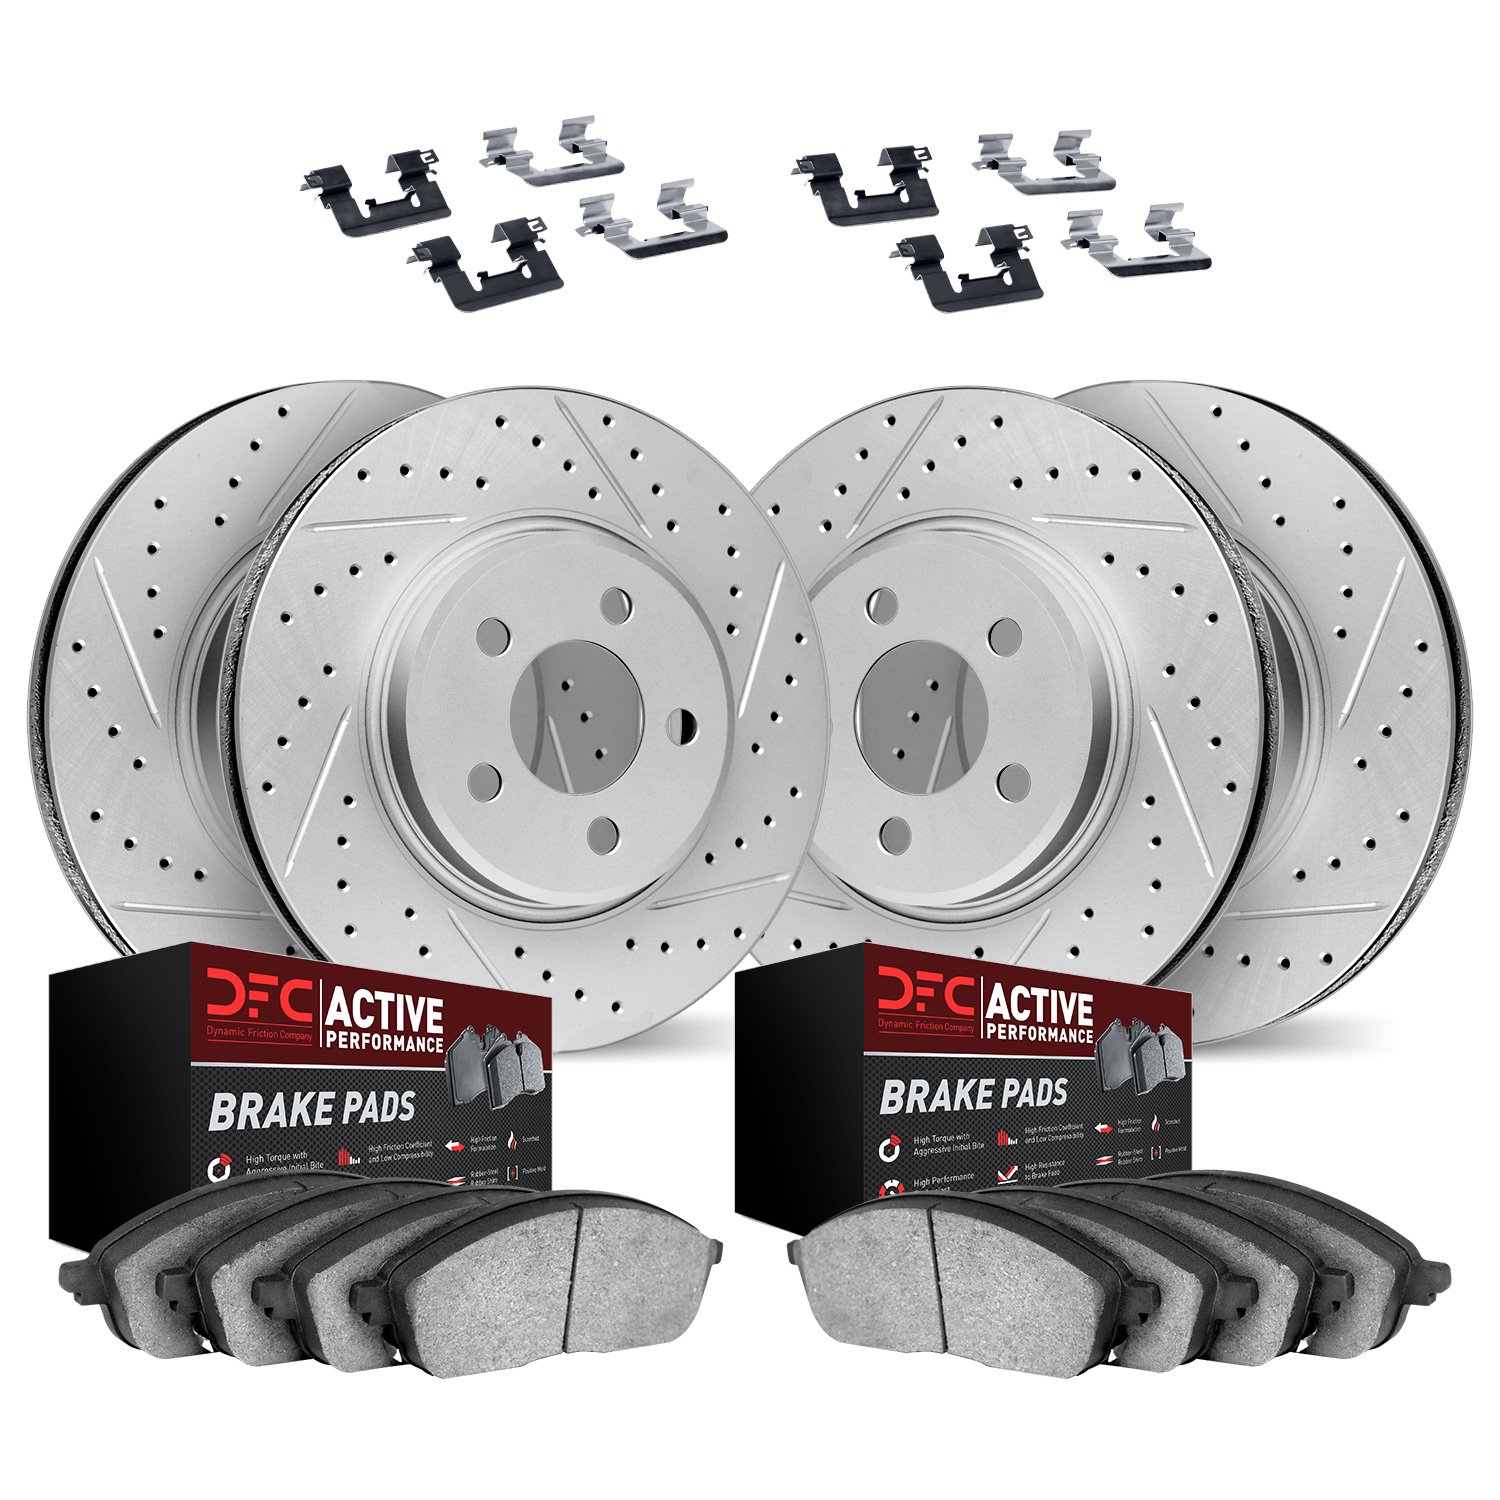 2714-73015 Geoperformance Drilled/Slotted Brake Rotors with Active Performance Pads Kit & Hardware, 2008-2011 Audi/Volkswagen, P